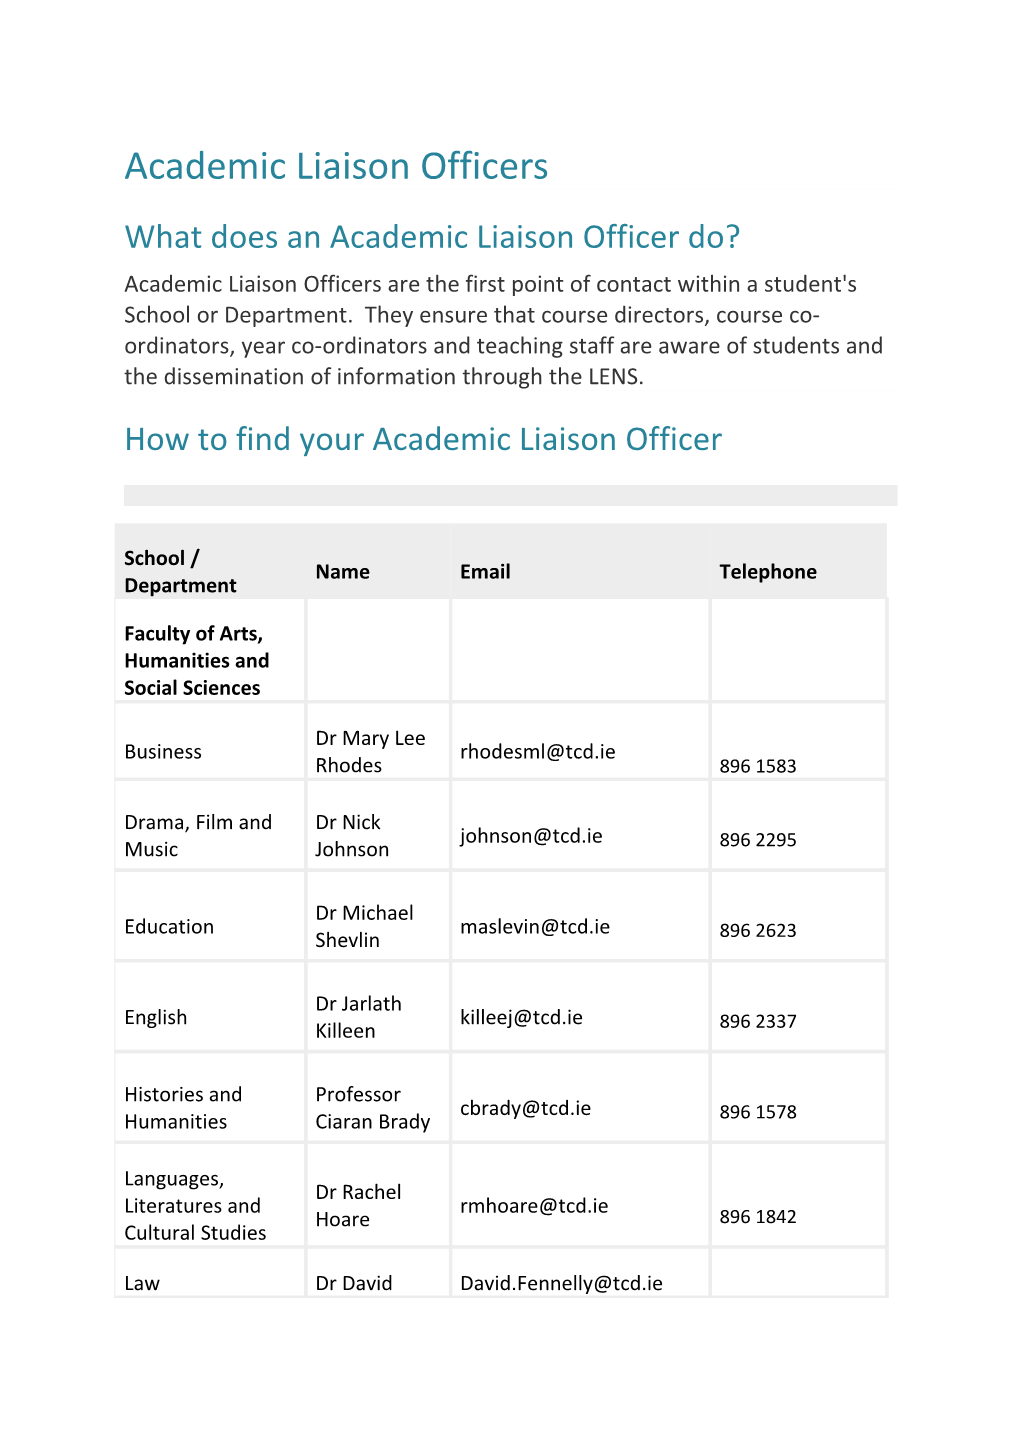 What Does an Academic Liaison Officer Do?